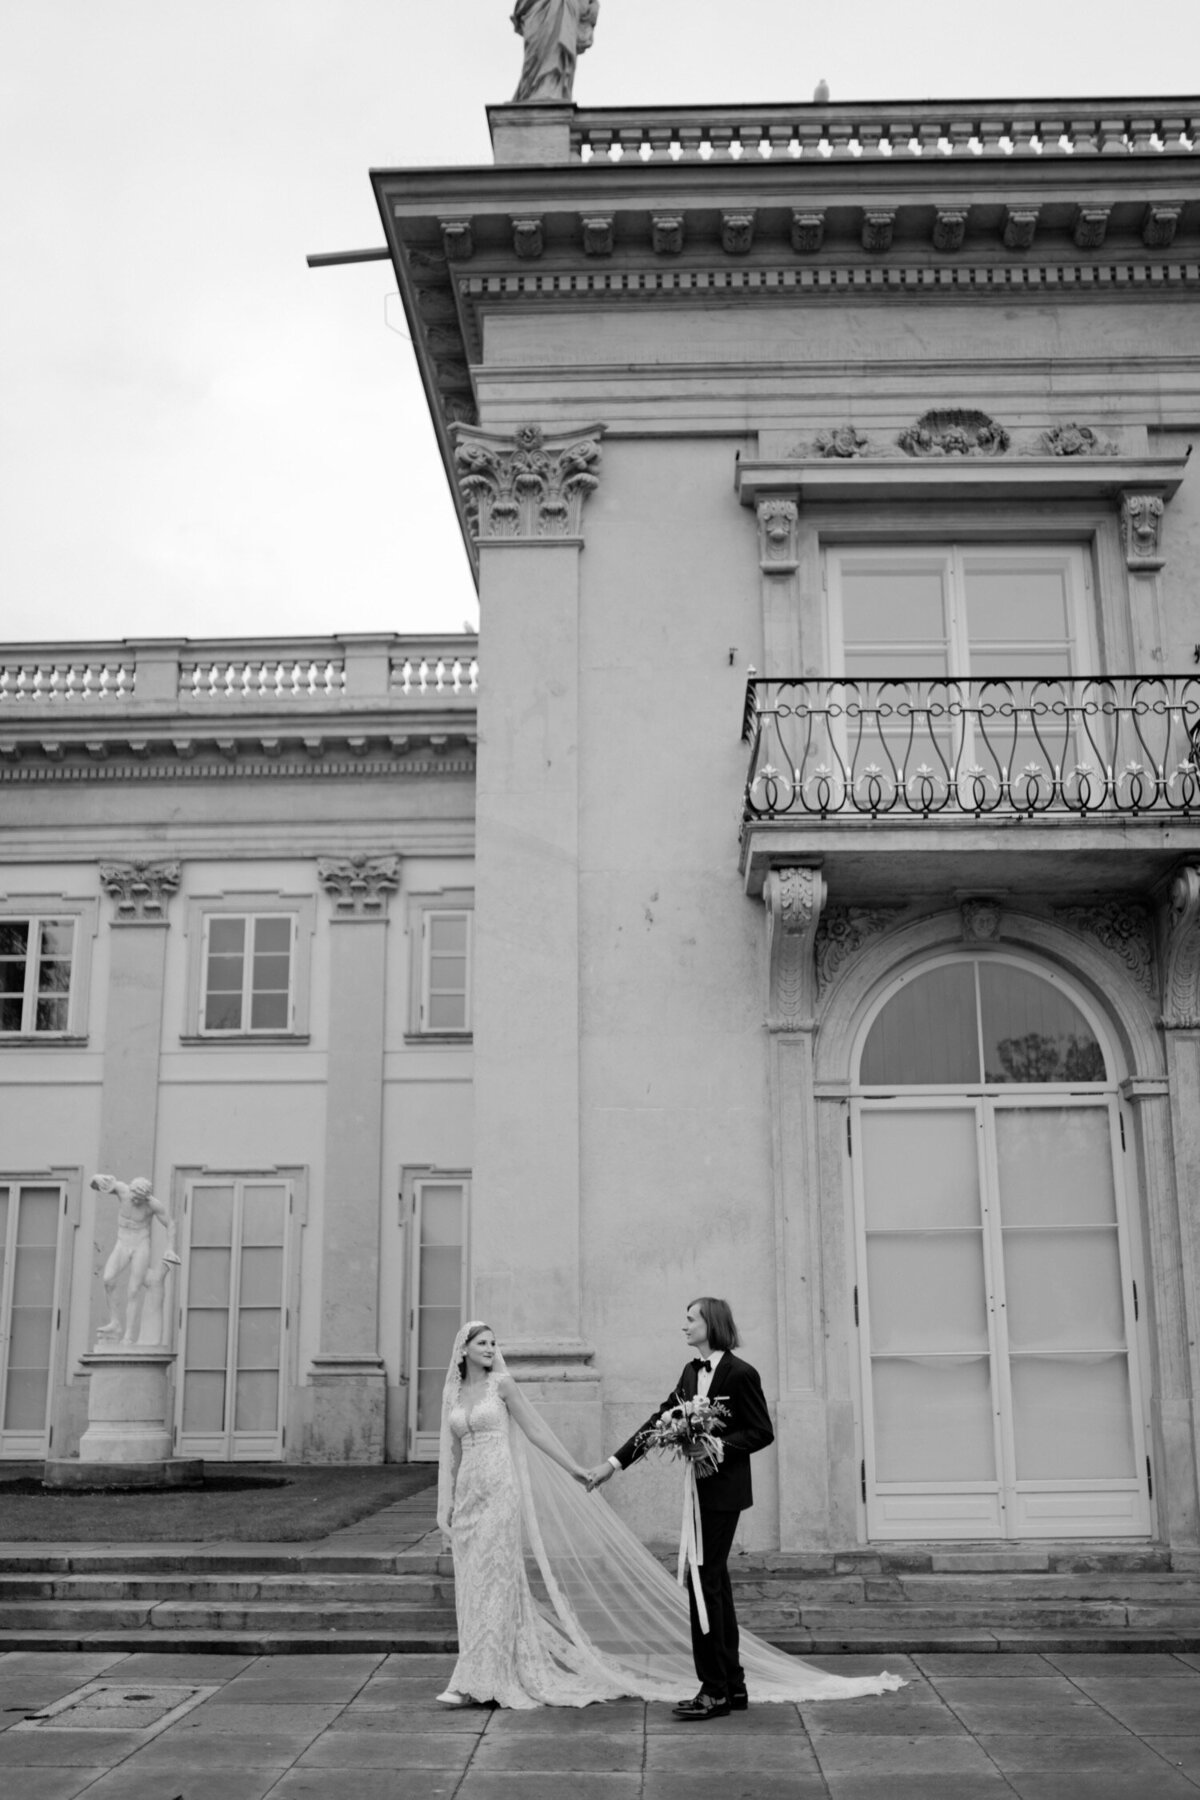 023_Flora_And_Grace_Europe_Fine_Art_Wedding_Photographer-228_A sophisticated fine art wedding in Europe with an editorial edge captured by Vogue wedding photographer Flora and Grace.